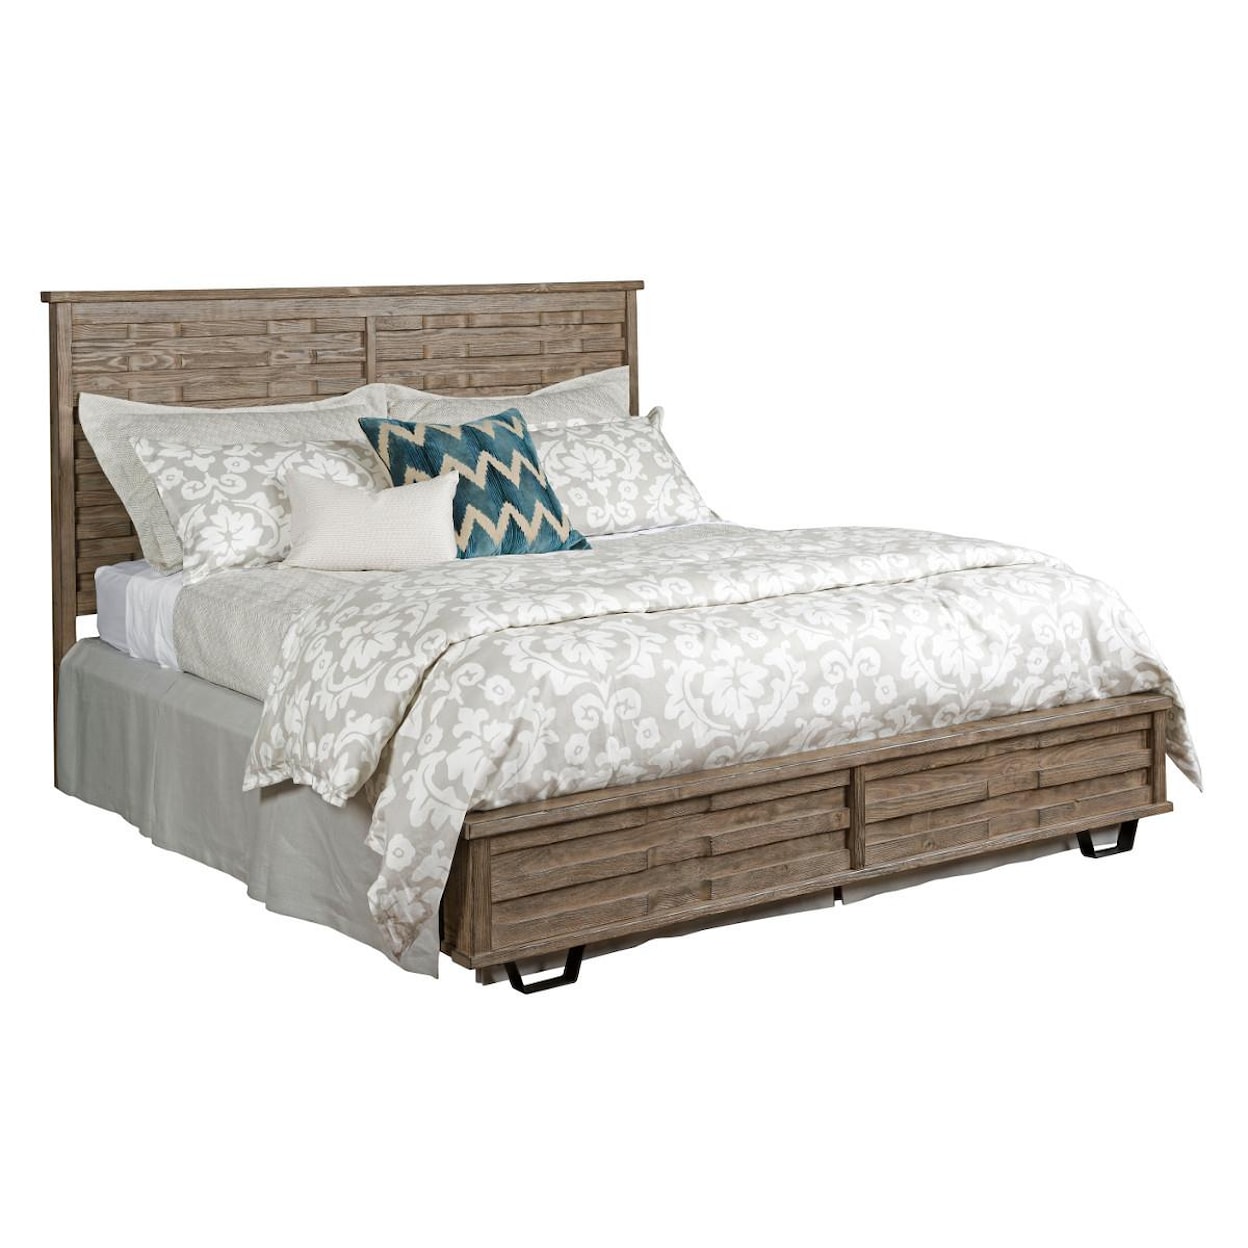 Kincaid Furniture Foundry King Panel Bed